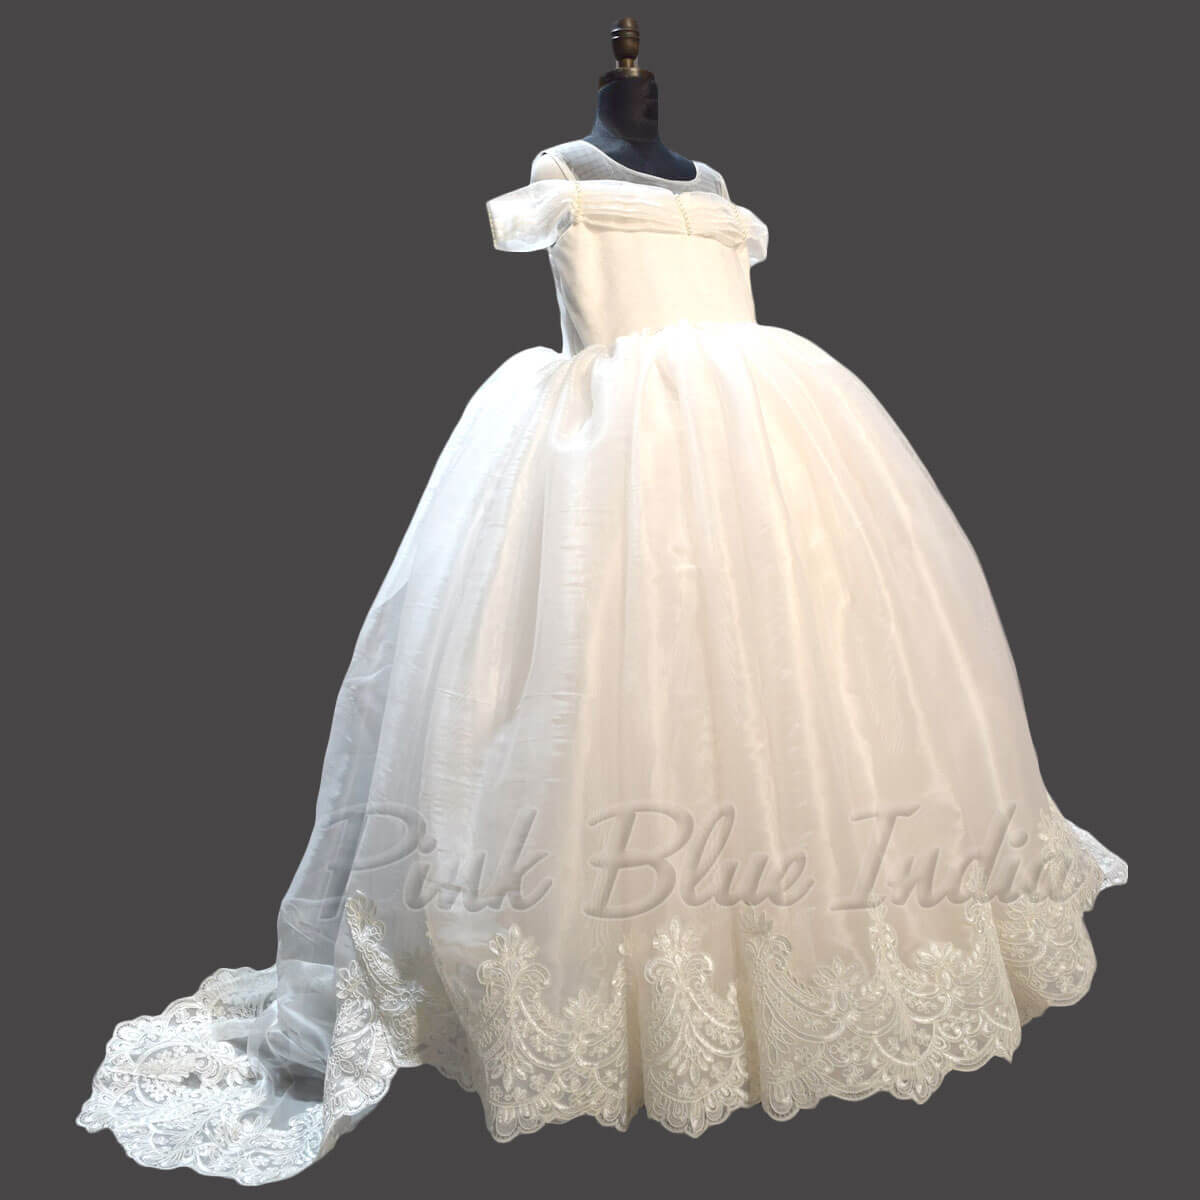 Tulle Plus Size Ballroom Gowns Baby Girl Dress For 1 Year Old Birthday,  Baptism, And Christening Long Sleeve Vestido LJ201223 From Cong05, $31.08 |  DHgate.Com